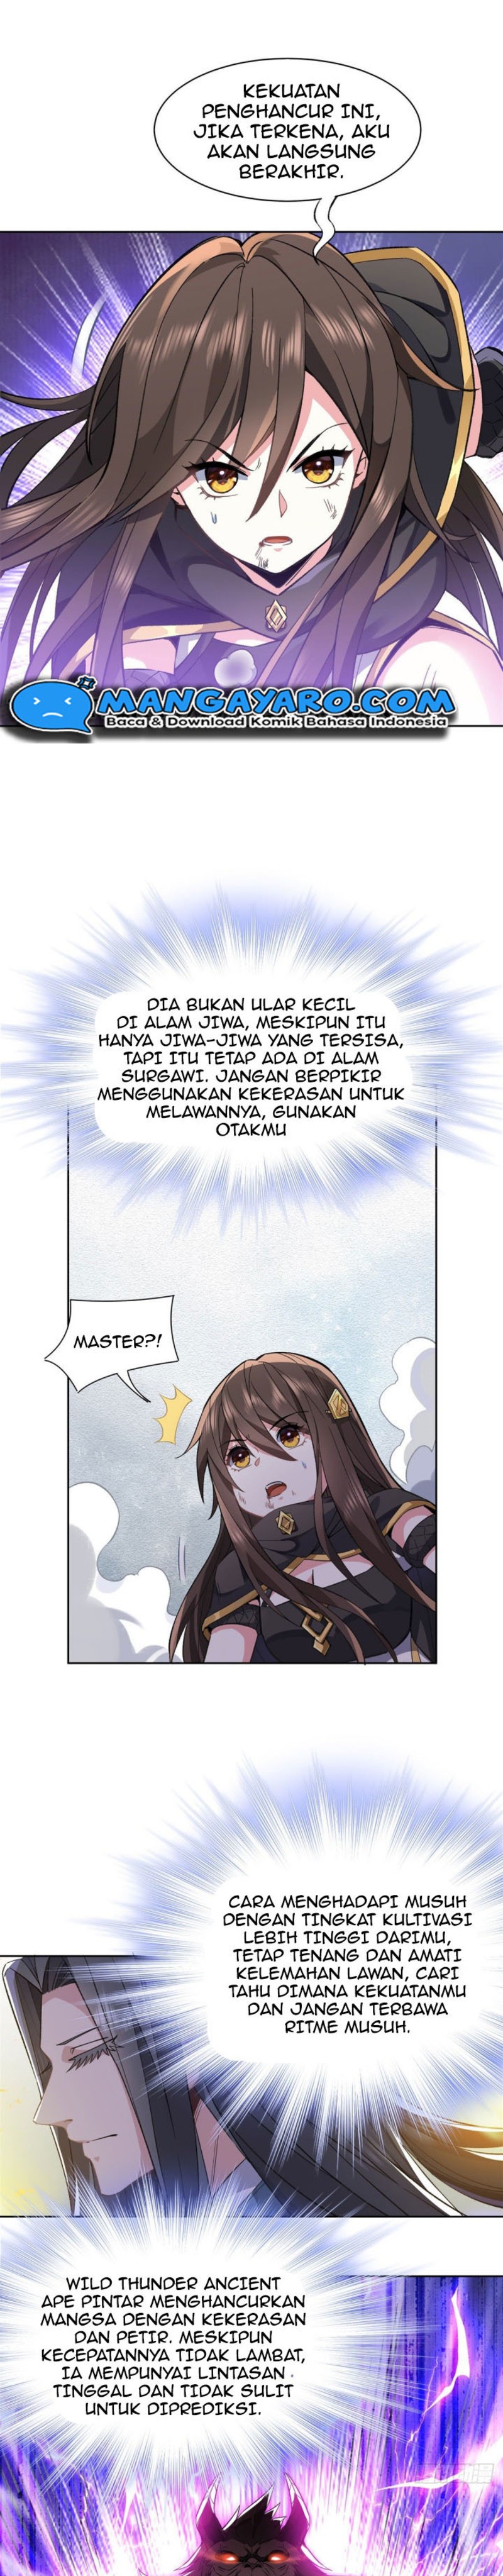 Dilarang COPAS - situs resmi www.mangacanblog.com - Komik my female apprentices are all big shots from the future 010 - chapter 10 11 Indonesia my female apprentices are all big shots from the future 010 - chapter 10 Terbaru 20|Baca Manga Komik Indonesia|Mangacan